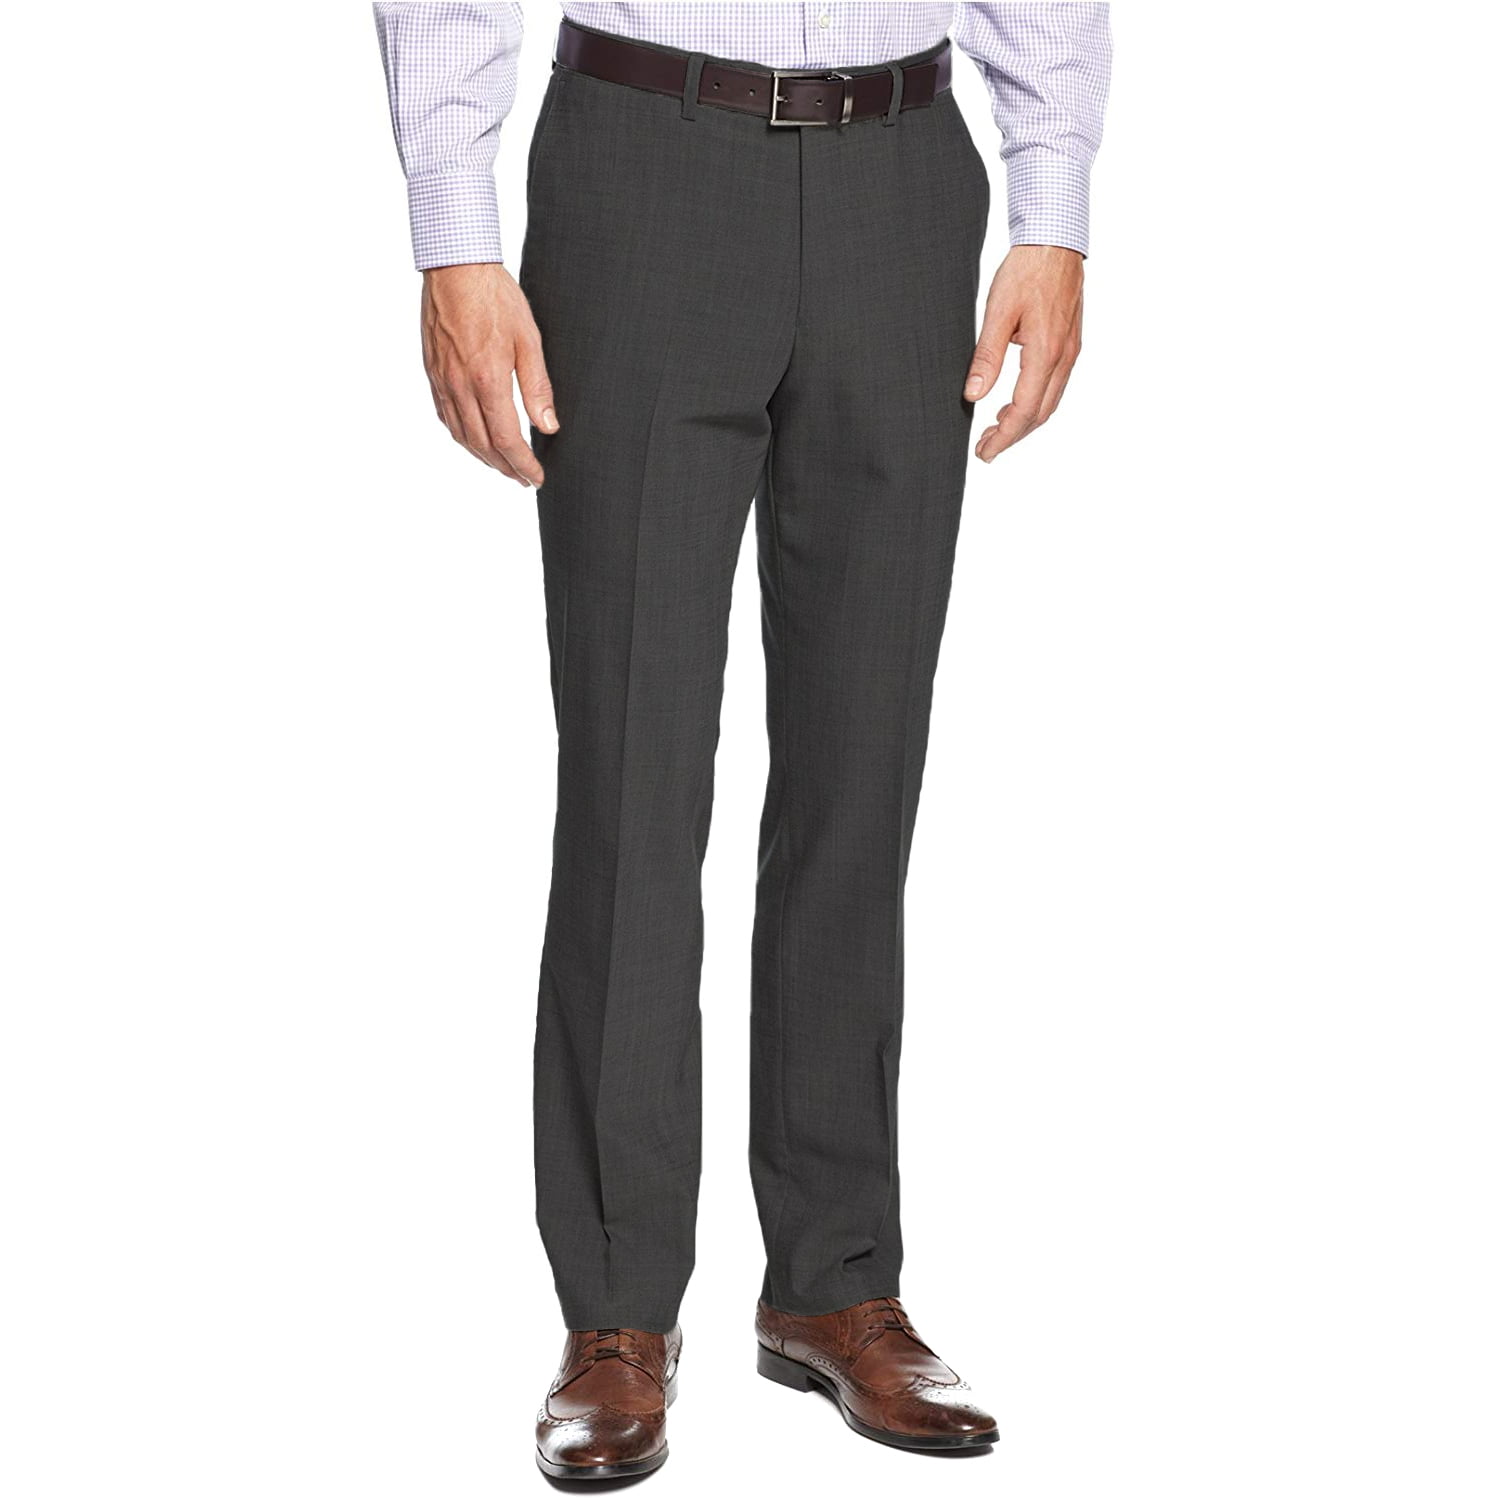 Kenneth Cole - Kenneth Cole Mens Precision Fit Flat Front Dress Pants ...